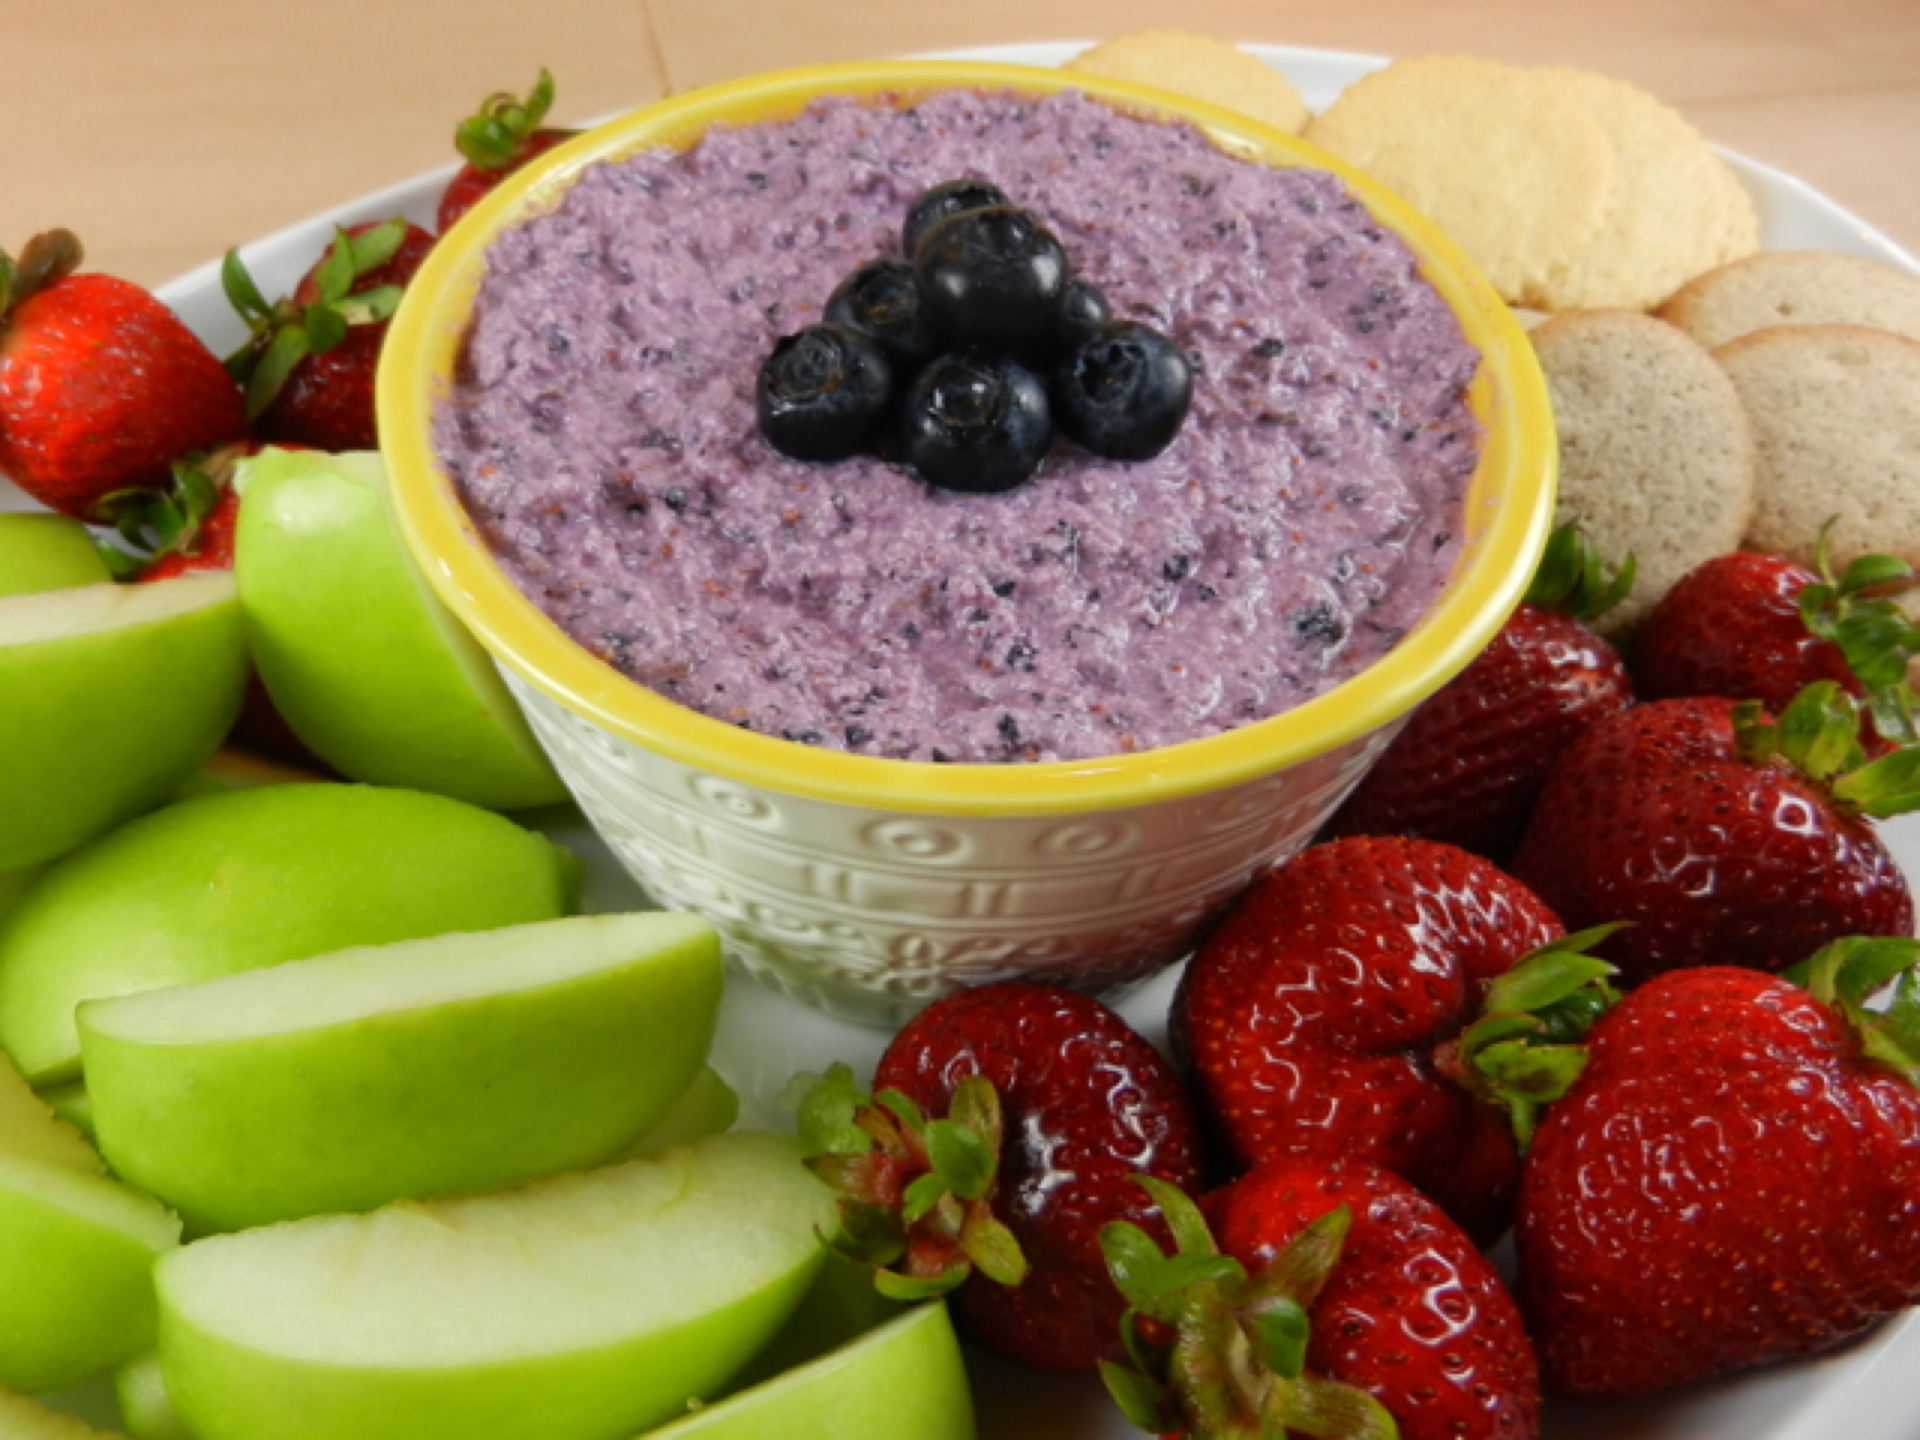 Blueberry Goat Cheese Dip: SUPER BOWL RECIPE MONTH: DIP SPECTACULAR!